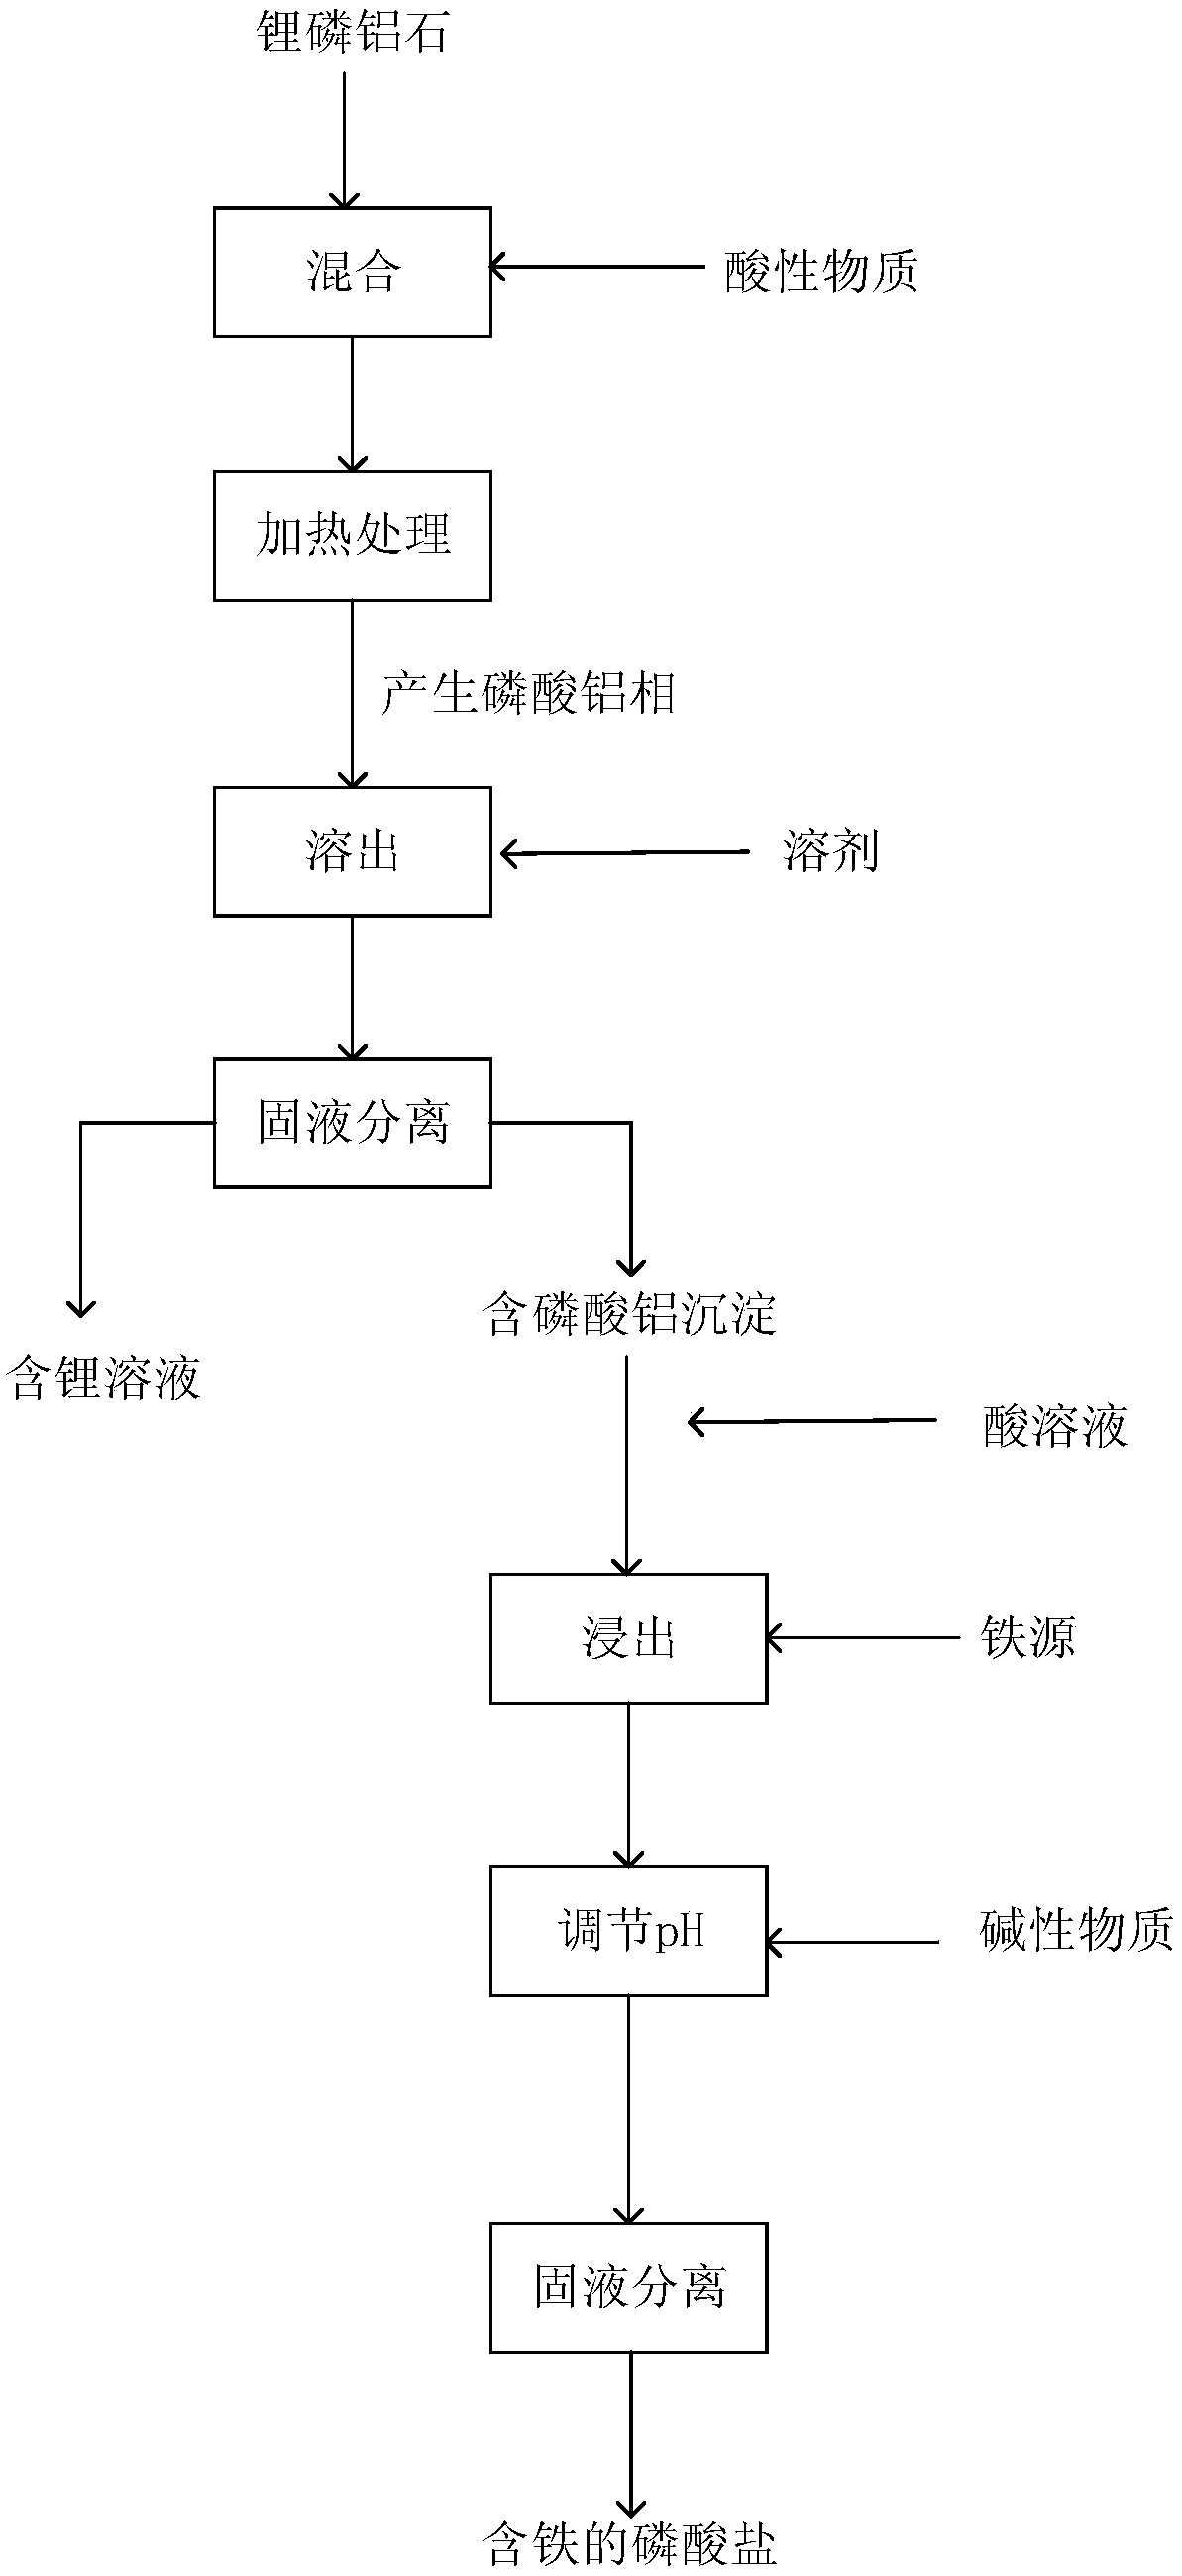 Method for extracting lithium from amblygonite and preparing iron-containing phosphate